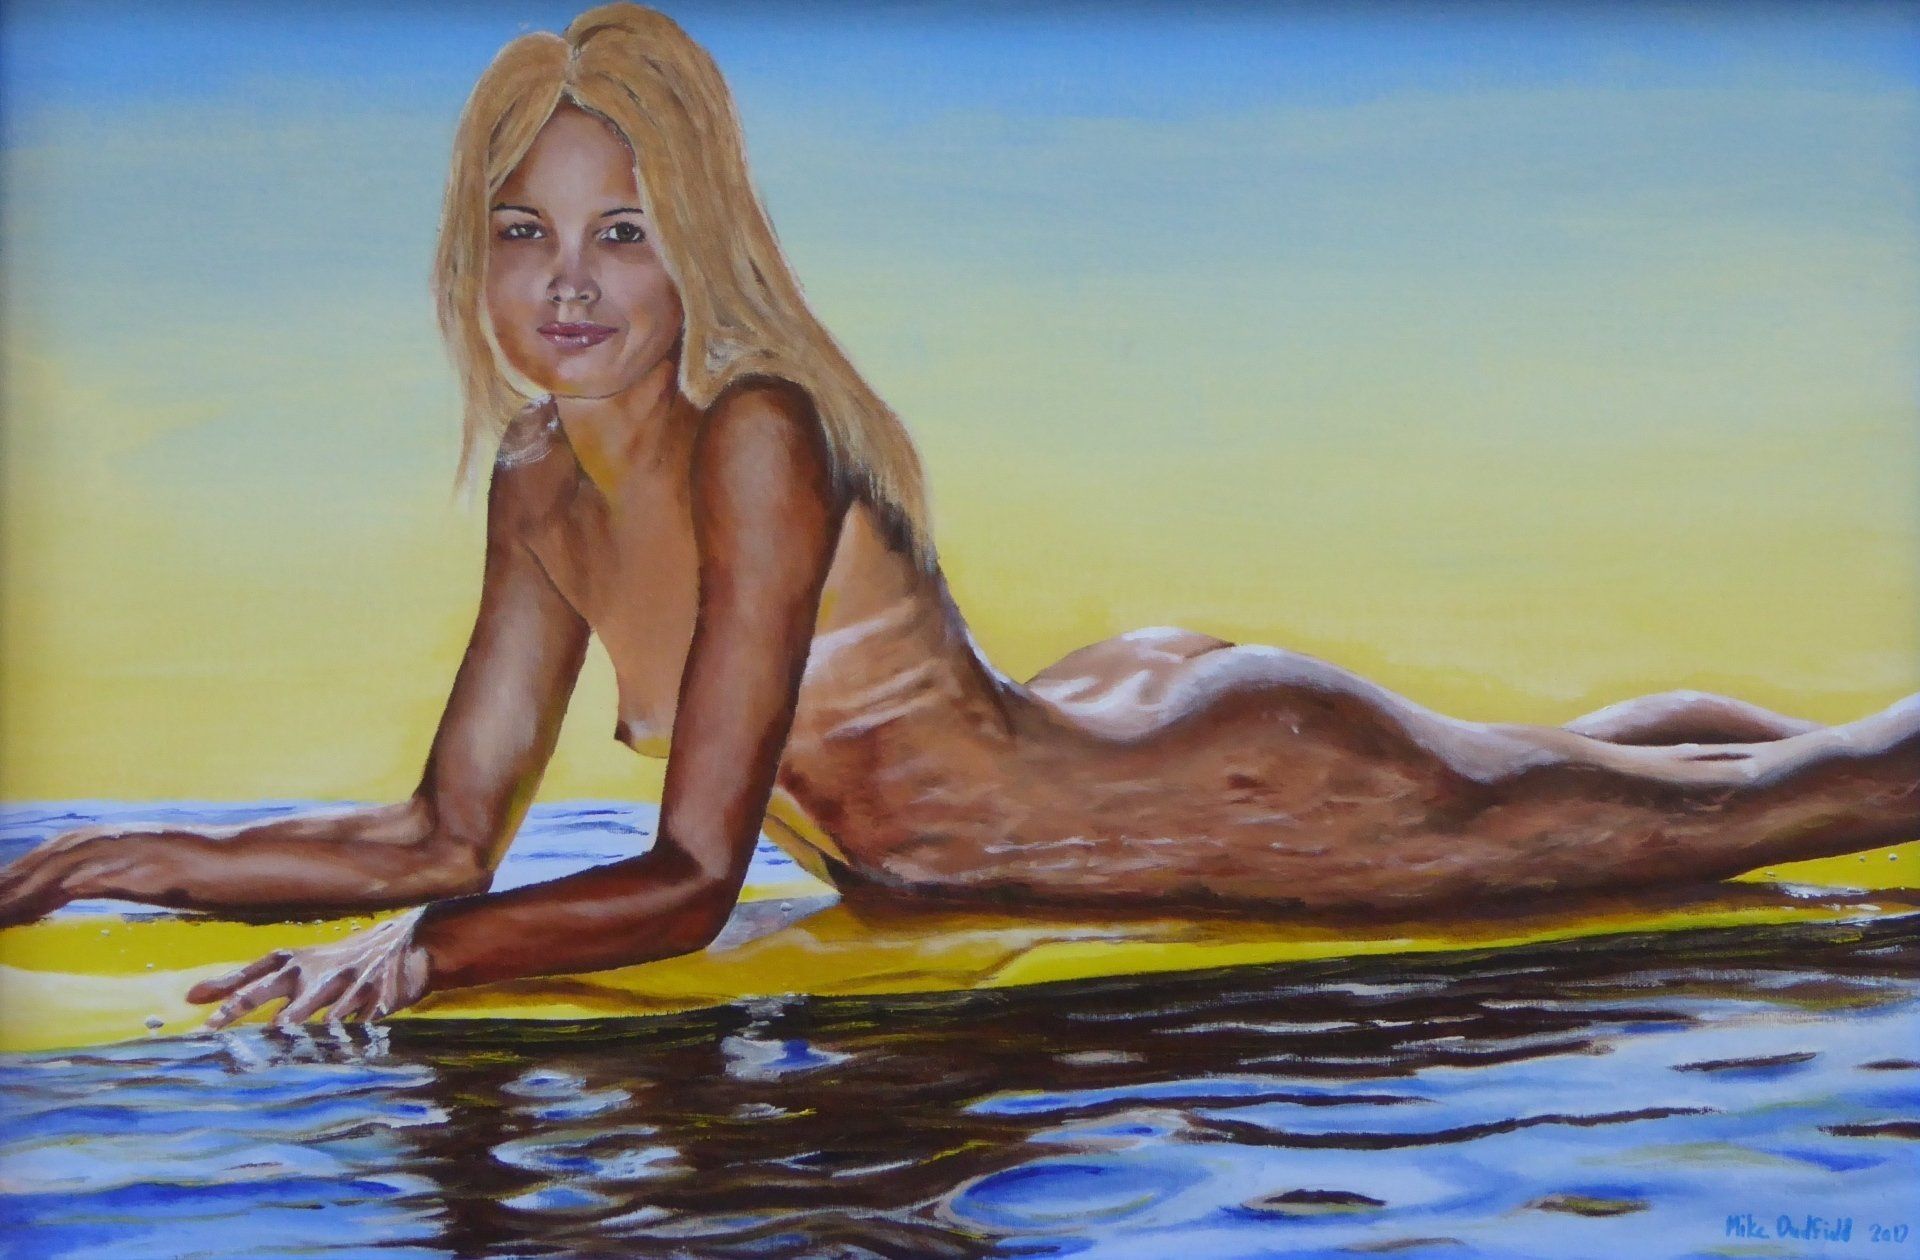 Painting of Sexy nude Girl on Surfboard